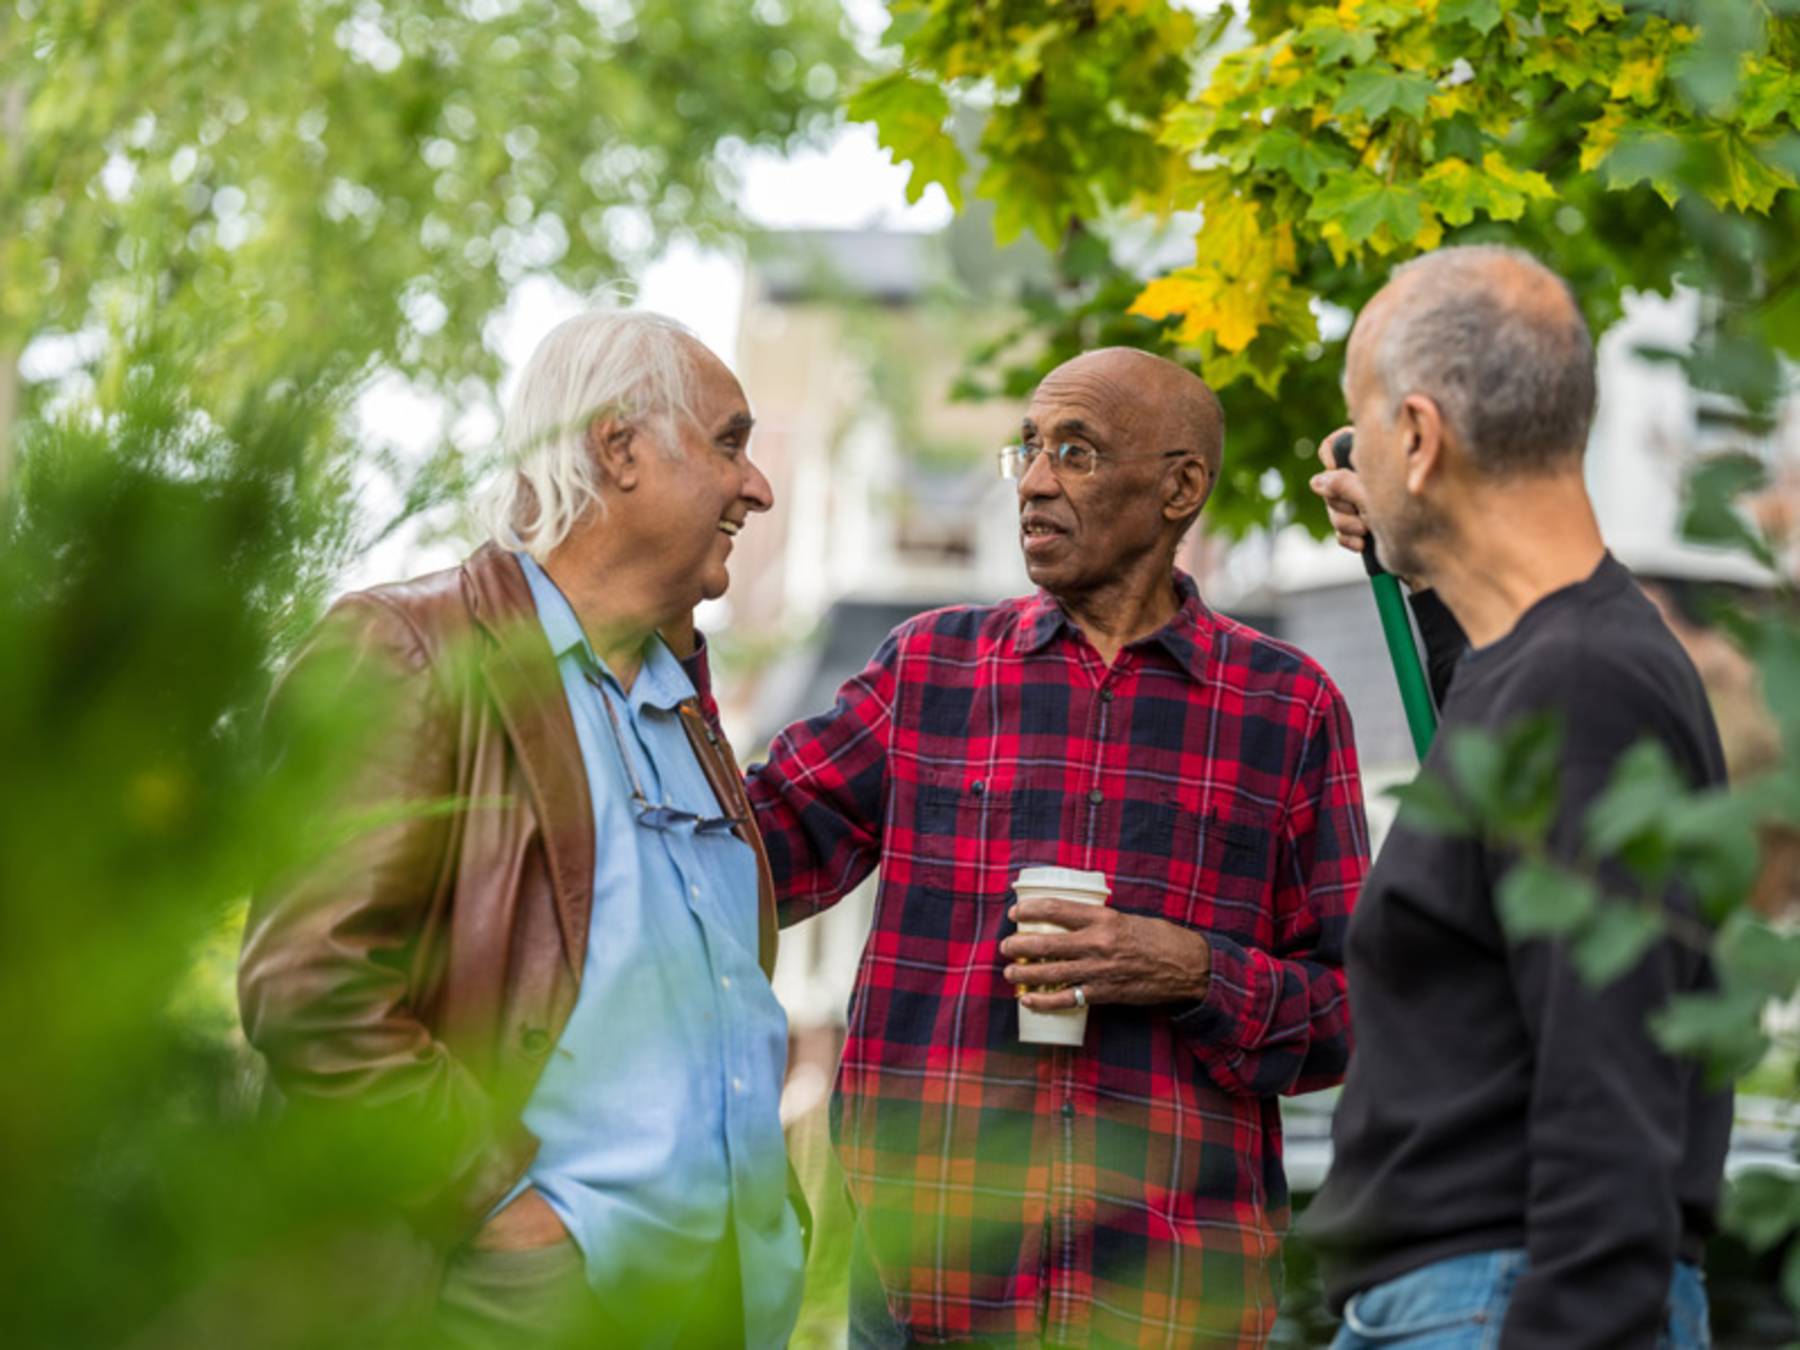 A group of senior men talk while standing outdoors